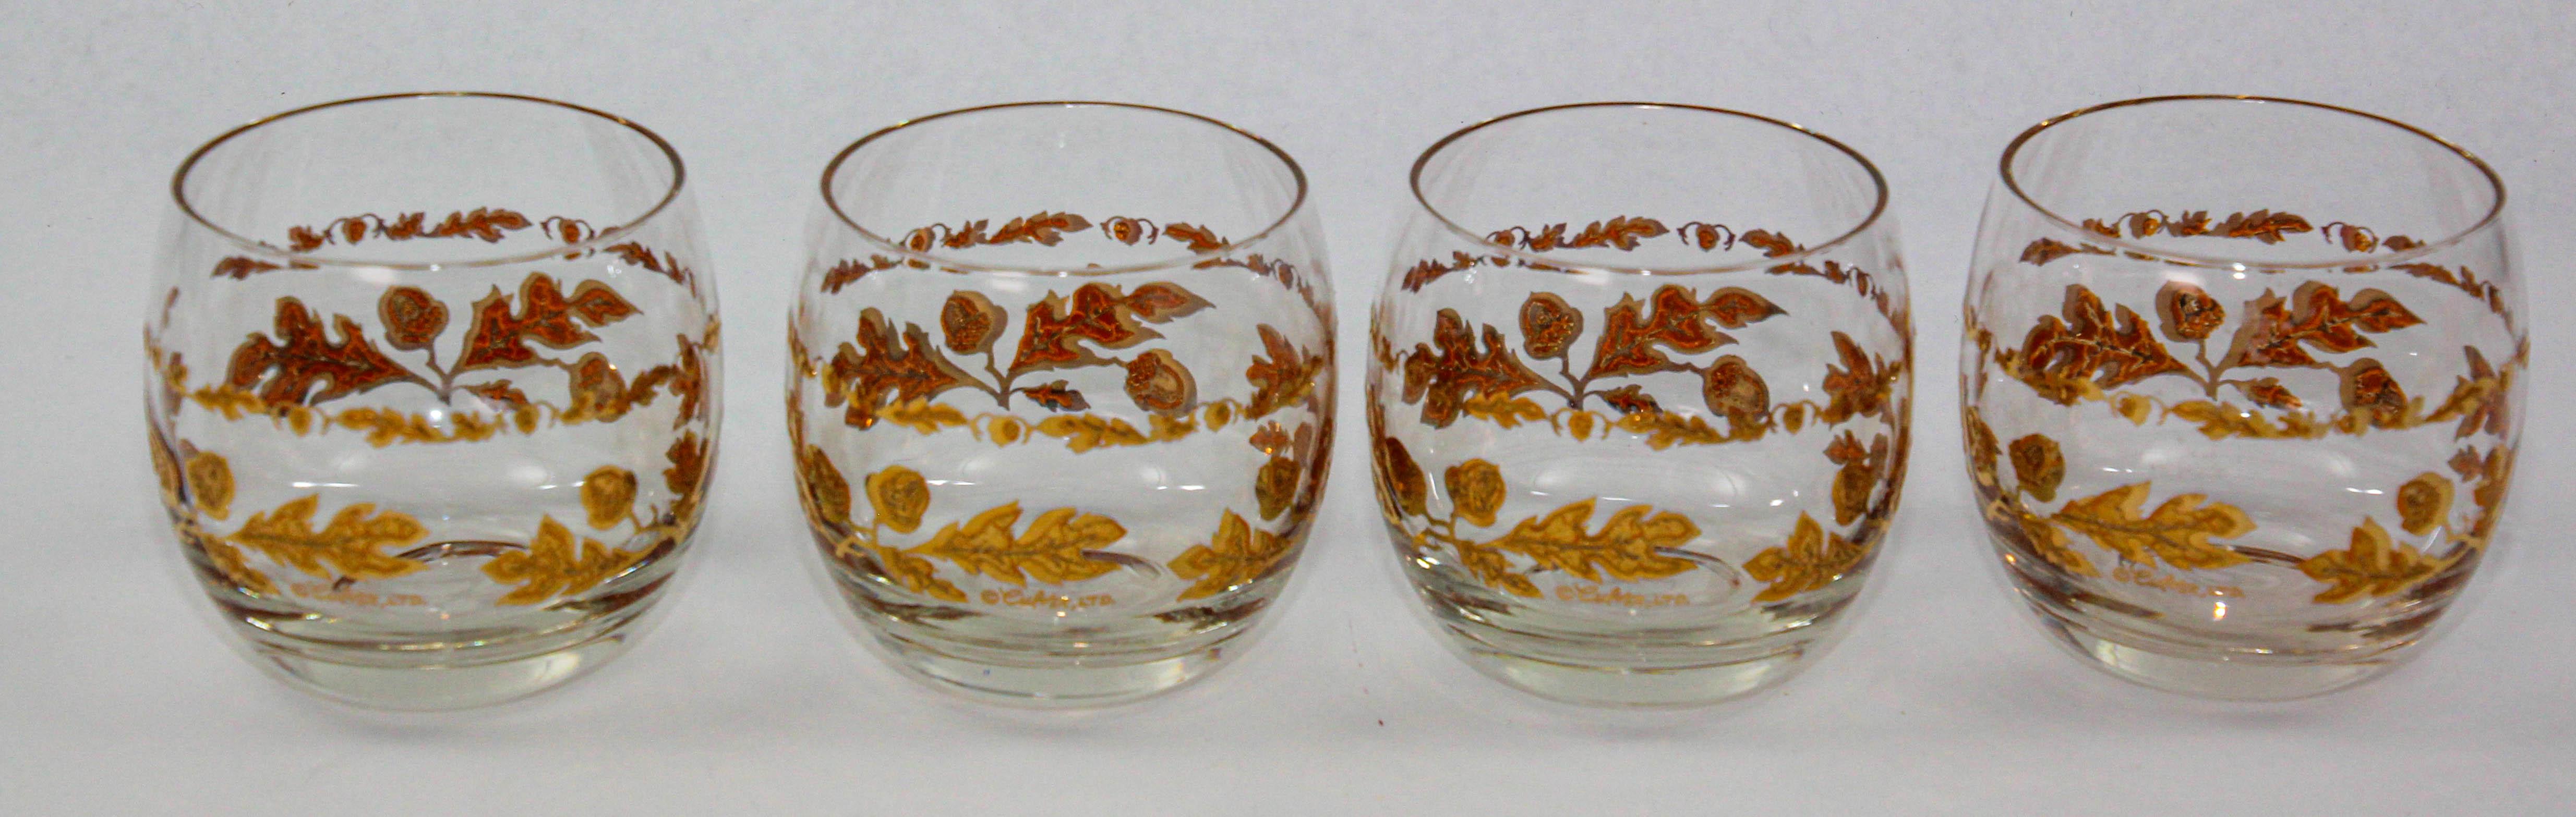 Mid-20th century Hollywood Regency 22-Karat gold set of 4 Roly Poly rock glasses by Culver Ltd. Set features a 22-Karat gold embossed floral Chantilly pattern motif.Enhance your barware collection with this limited edition Culver Roly Poly set of 4